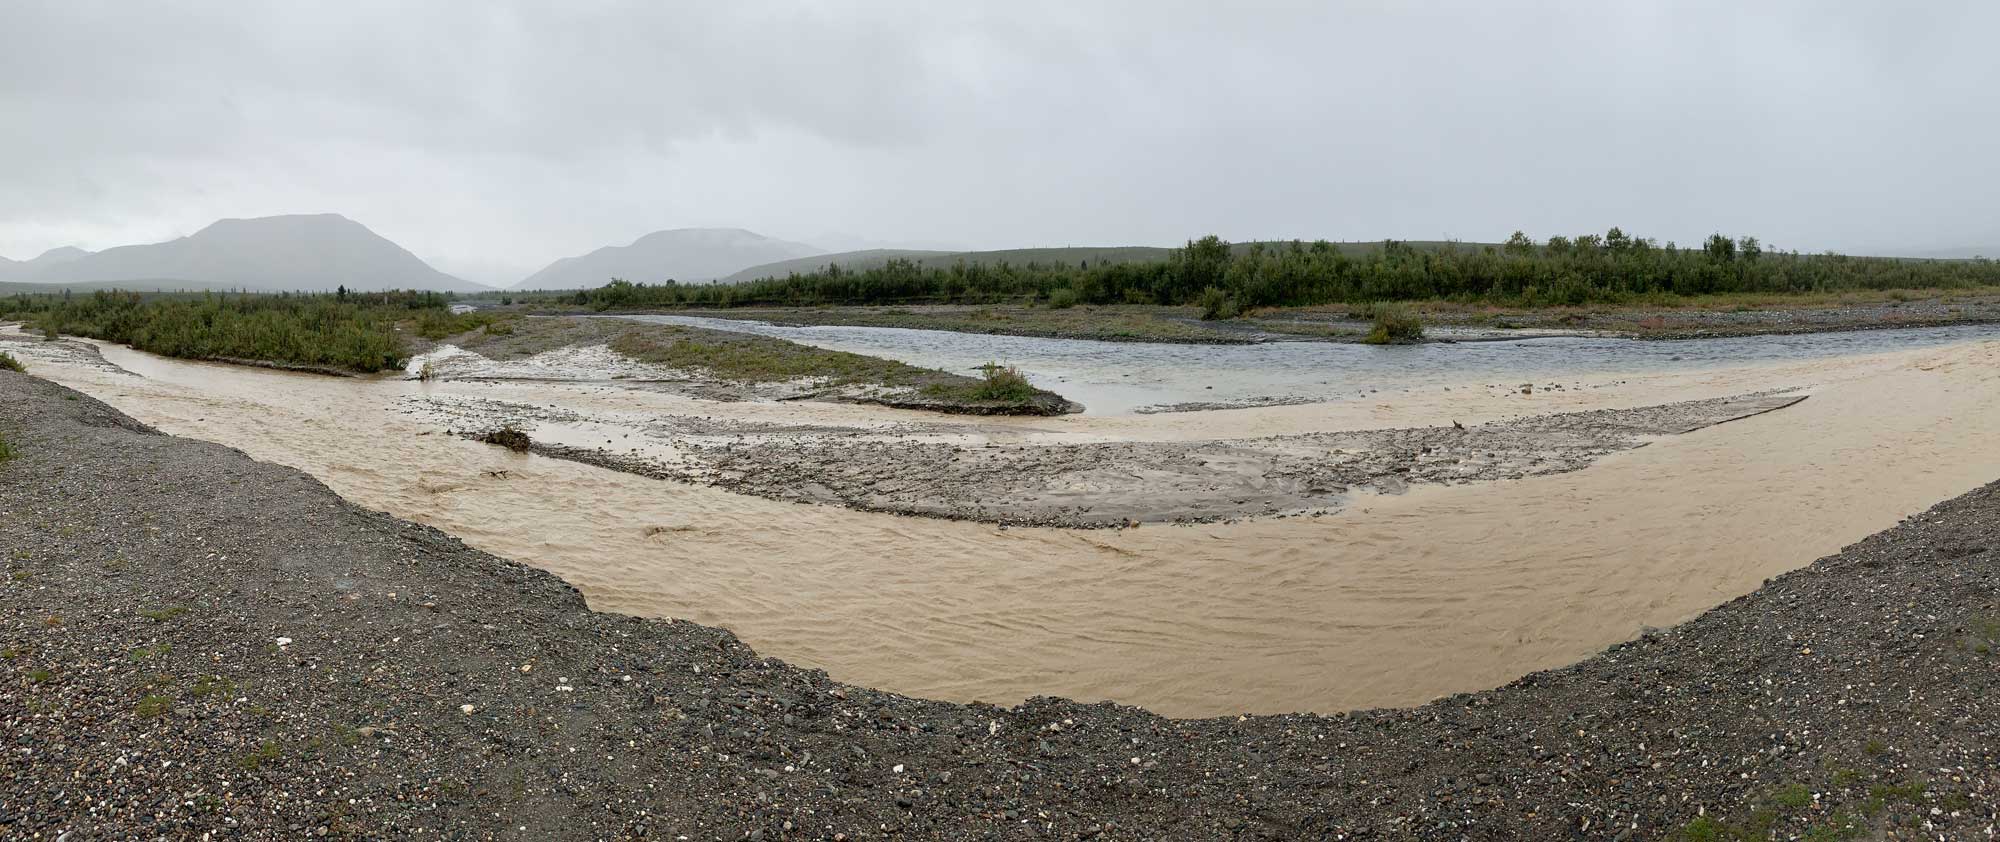 Photograph of two streams coming together in Denali National Park, Alaska. One of the streams is brown because of the large amount of sediment it is carrying.